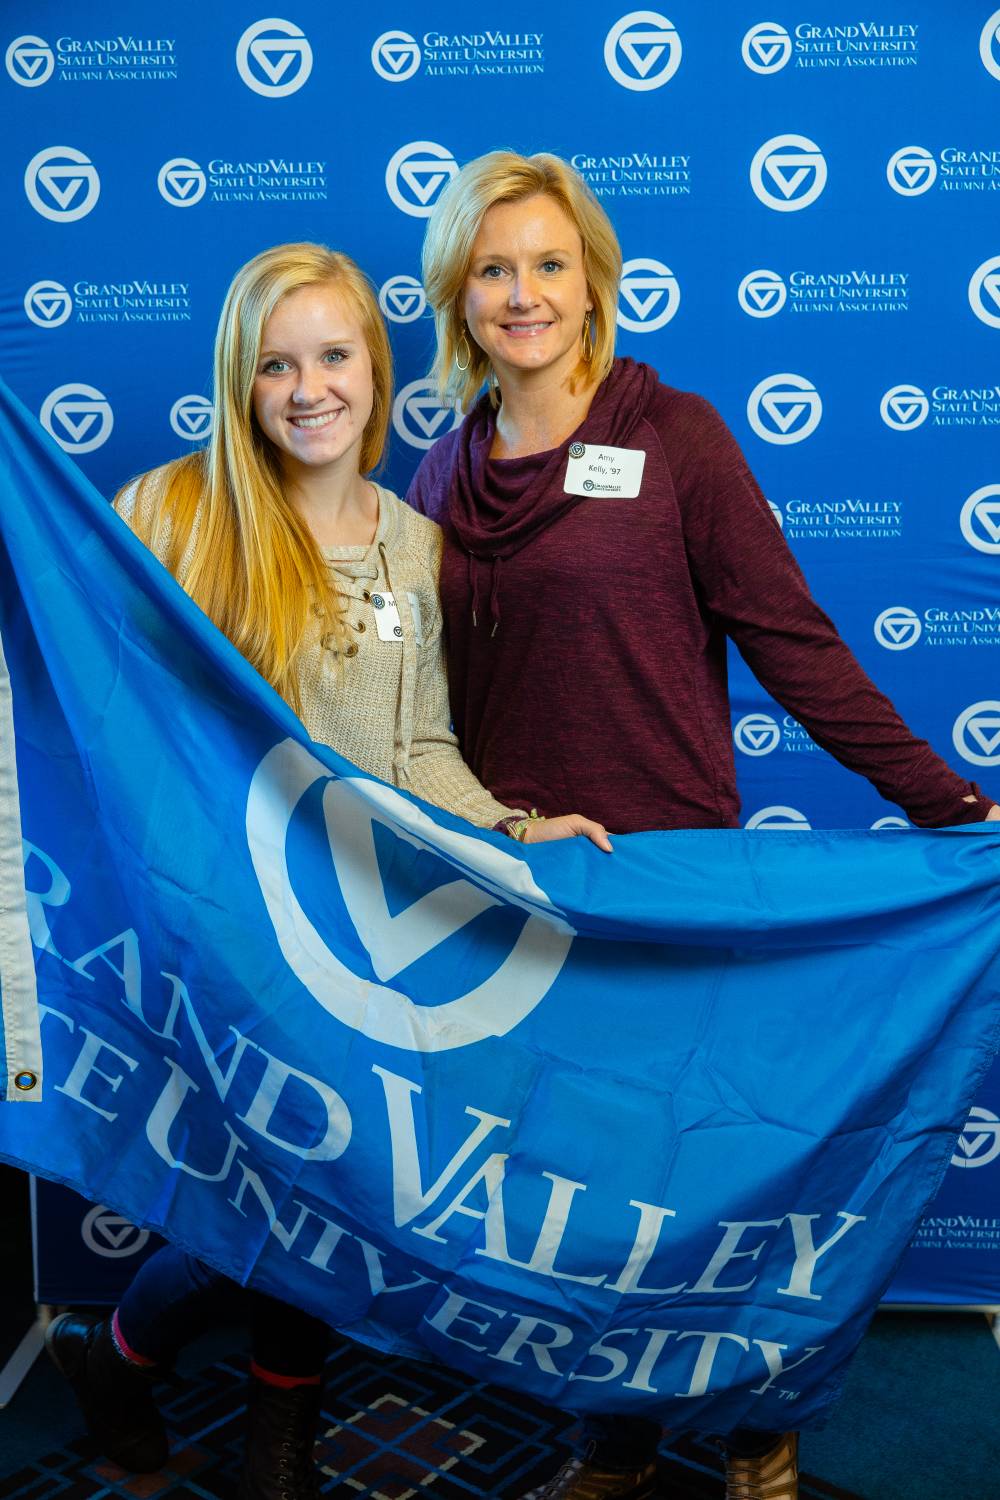 Two alumni pose for a photo with the GV flag